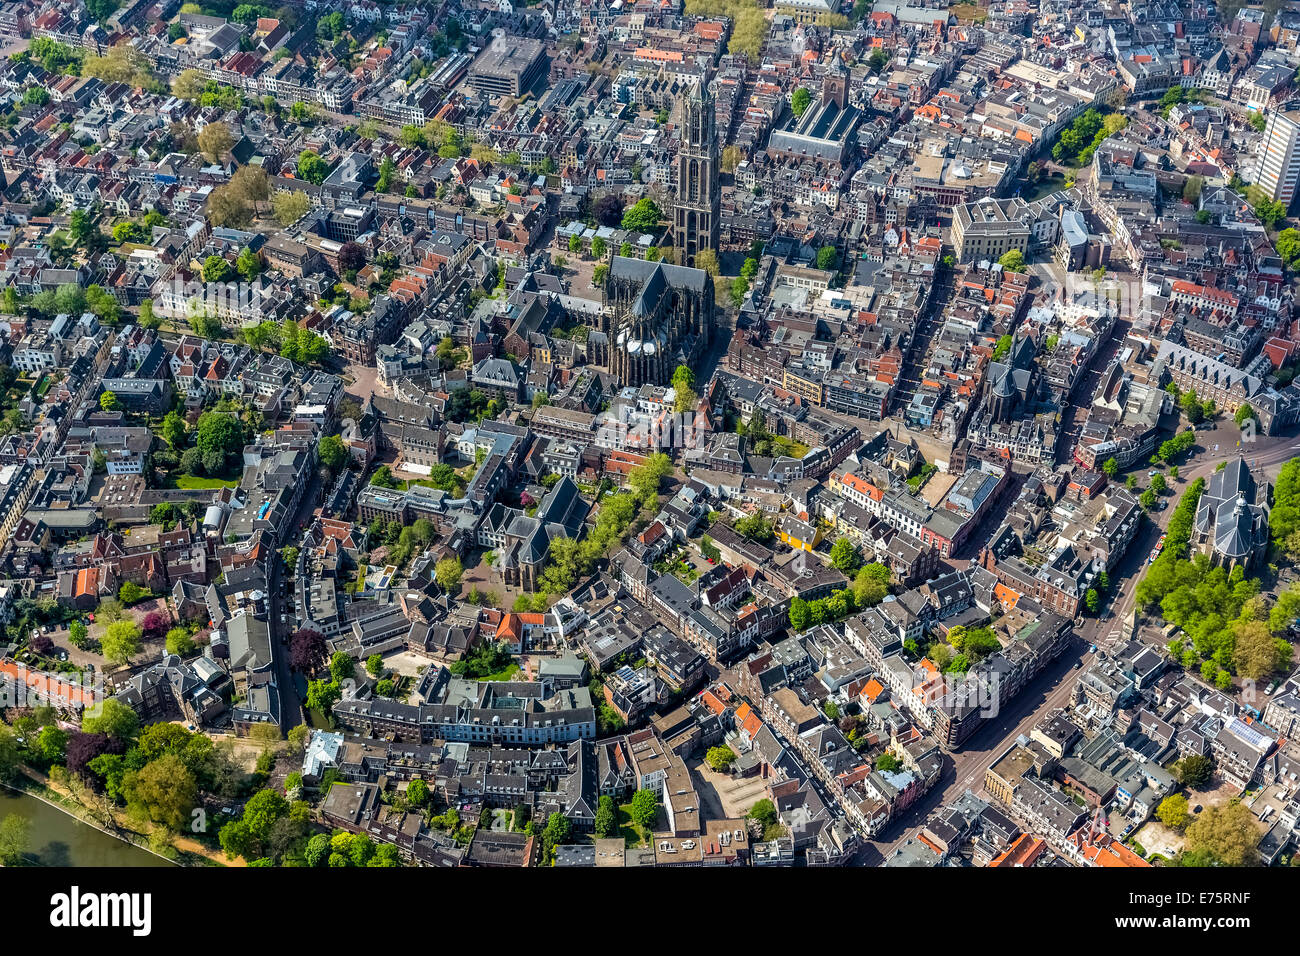 Aerial view, town centre with St. Martin's Cathedral or Dom Church, Domkerk, Utrecht, Province of Utrecht, Netherlands Stock Photo